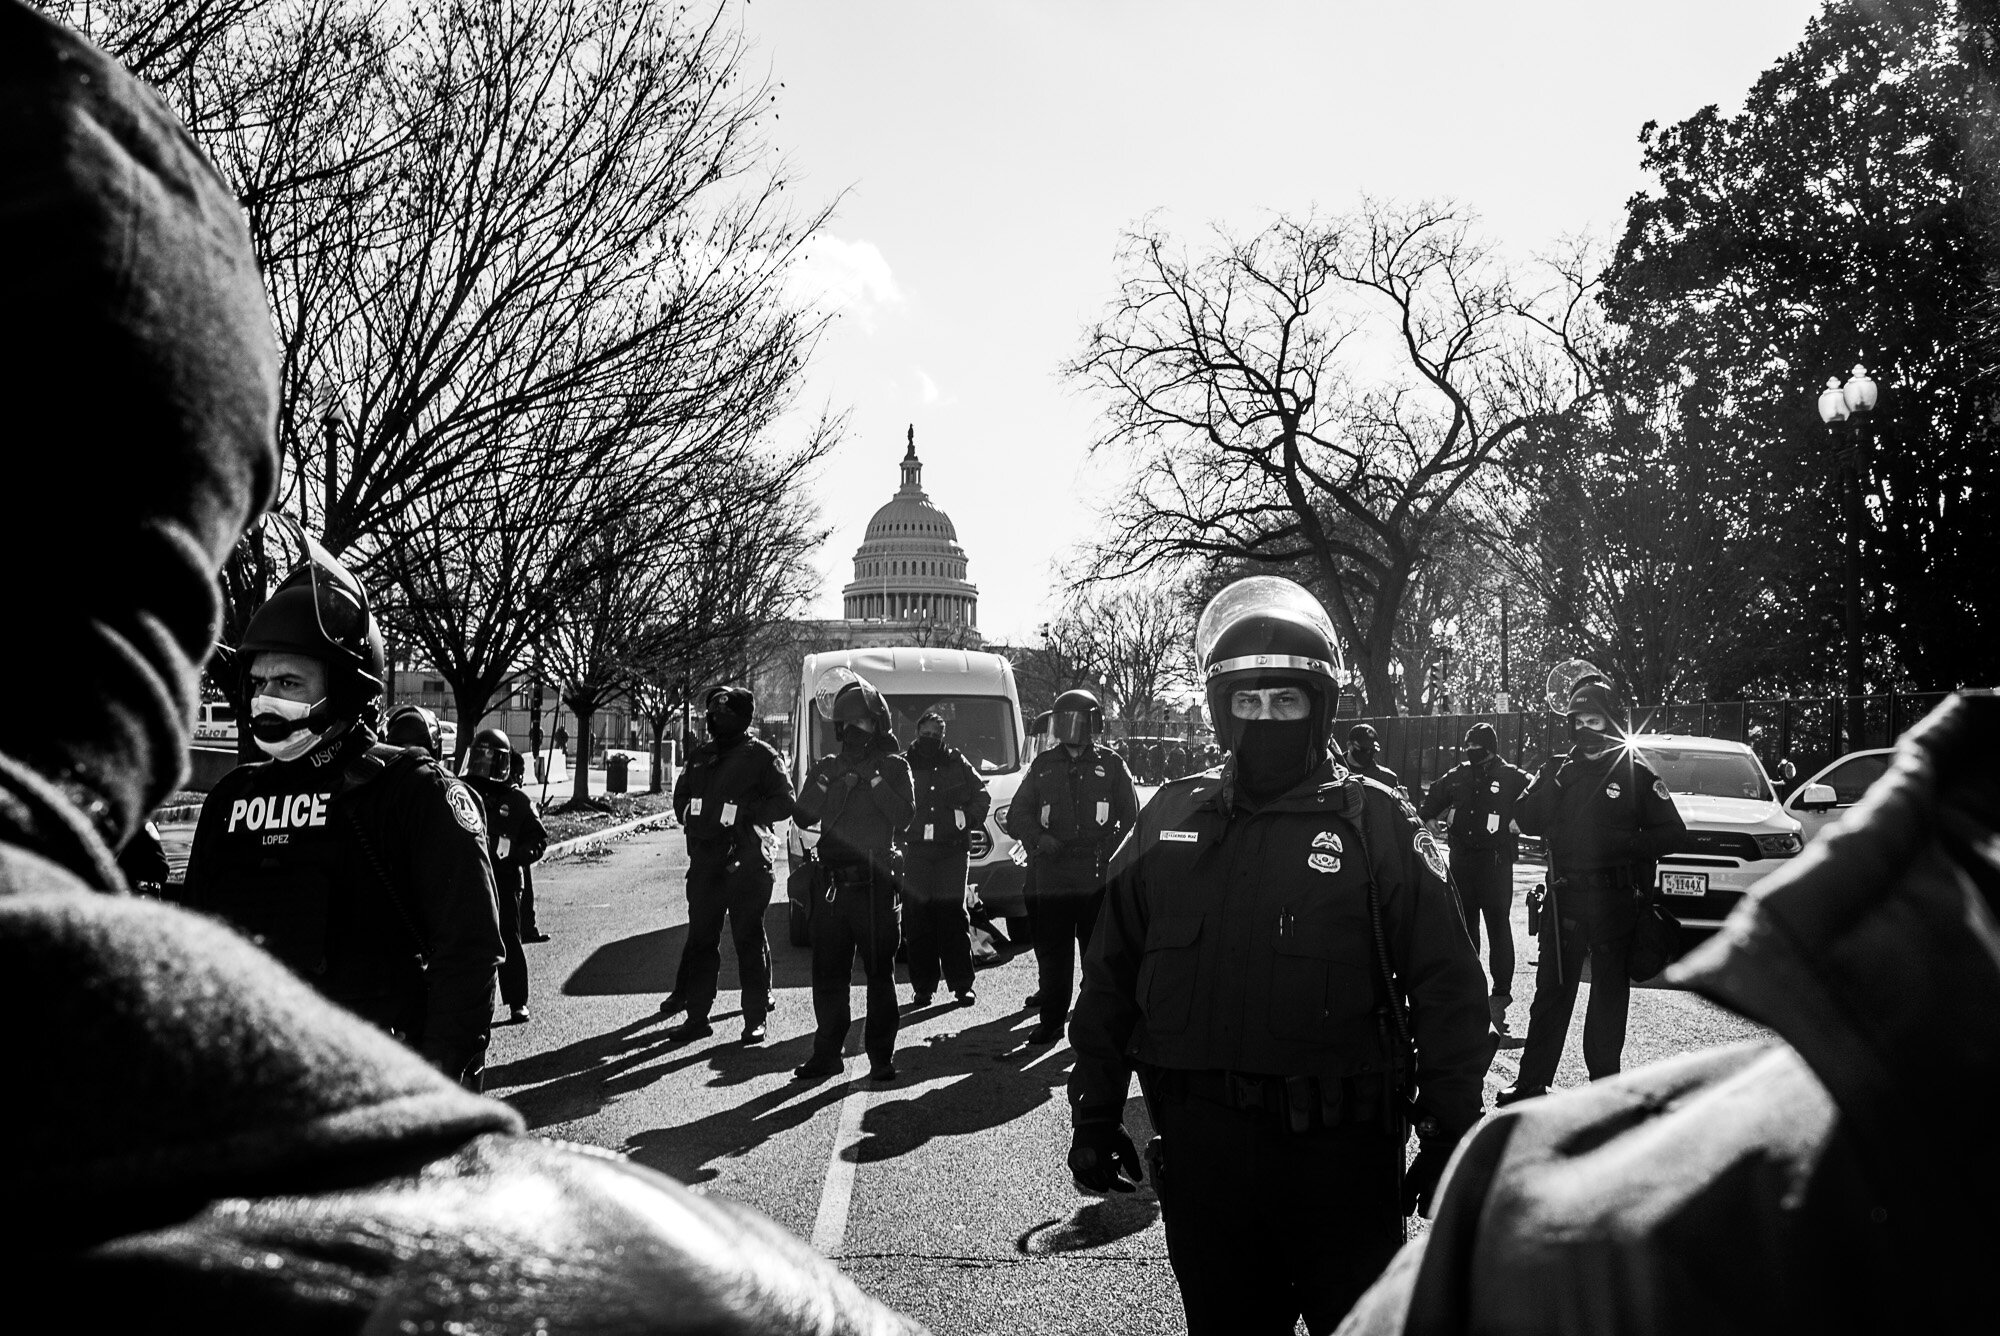  Police block road on the north side of the Capitol Building during Joe Biden’s Inauguration. 